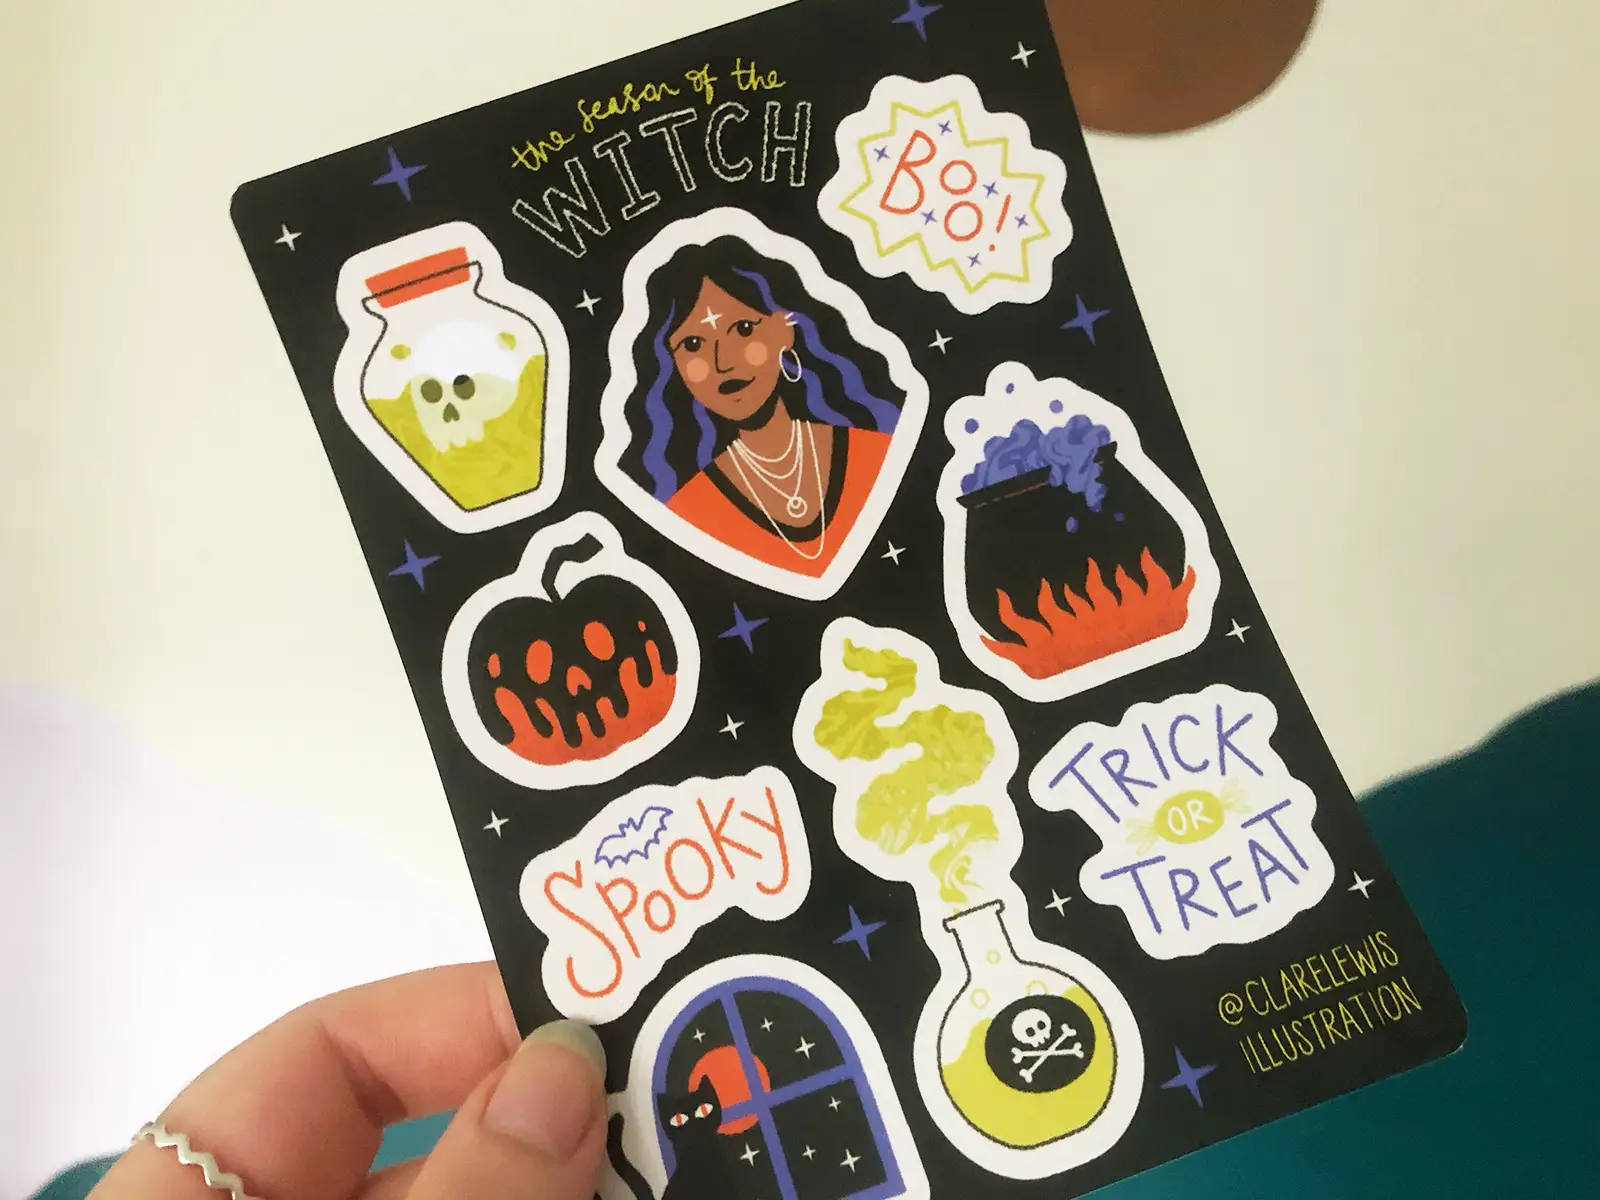 Season of the witch sticker sheet including 9 halloween themed stickers